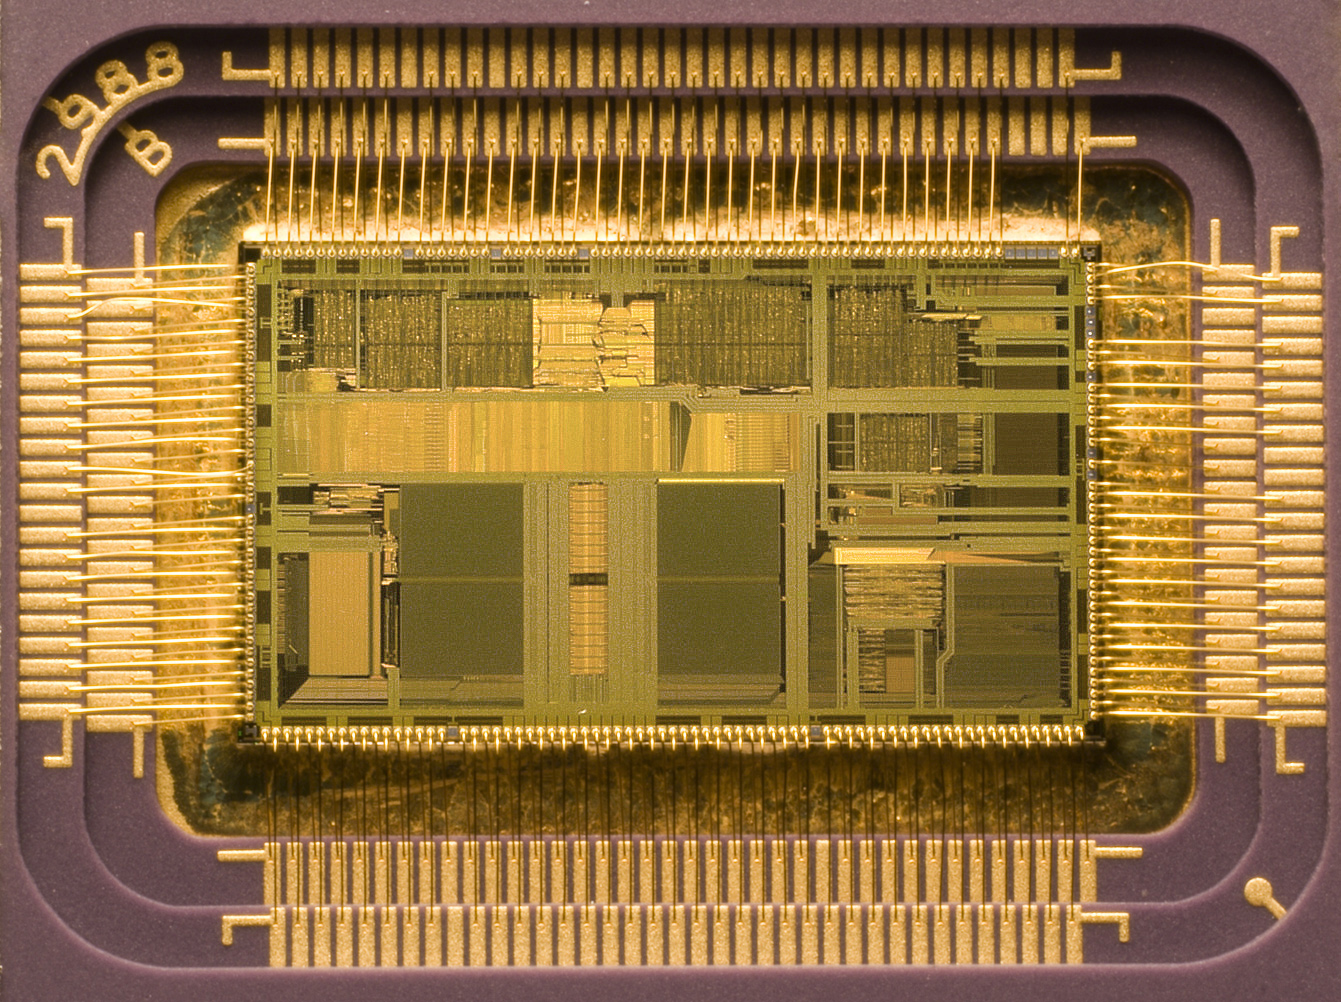 Photo of an Intel chip, covered in gold and wires.